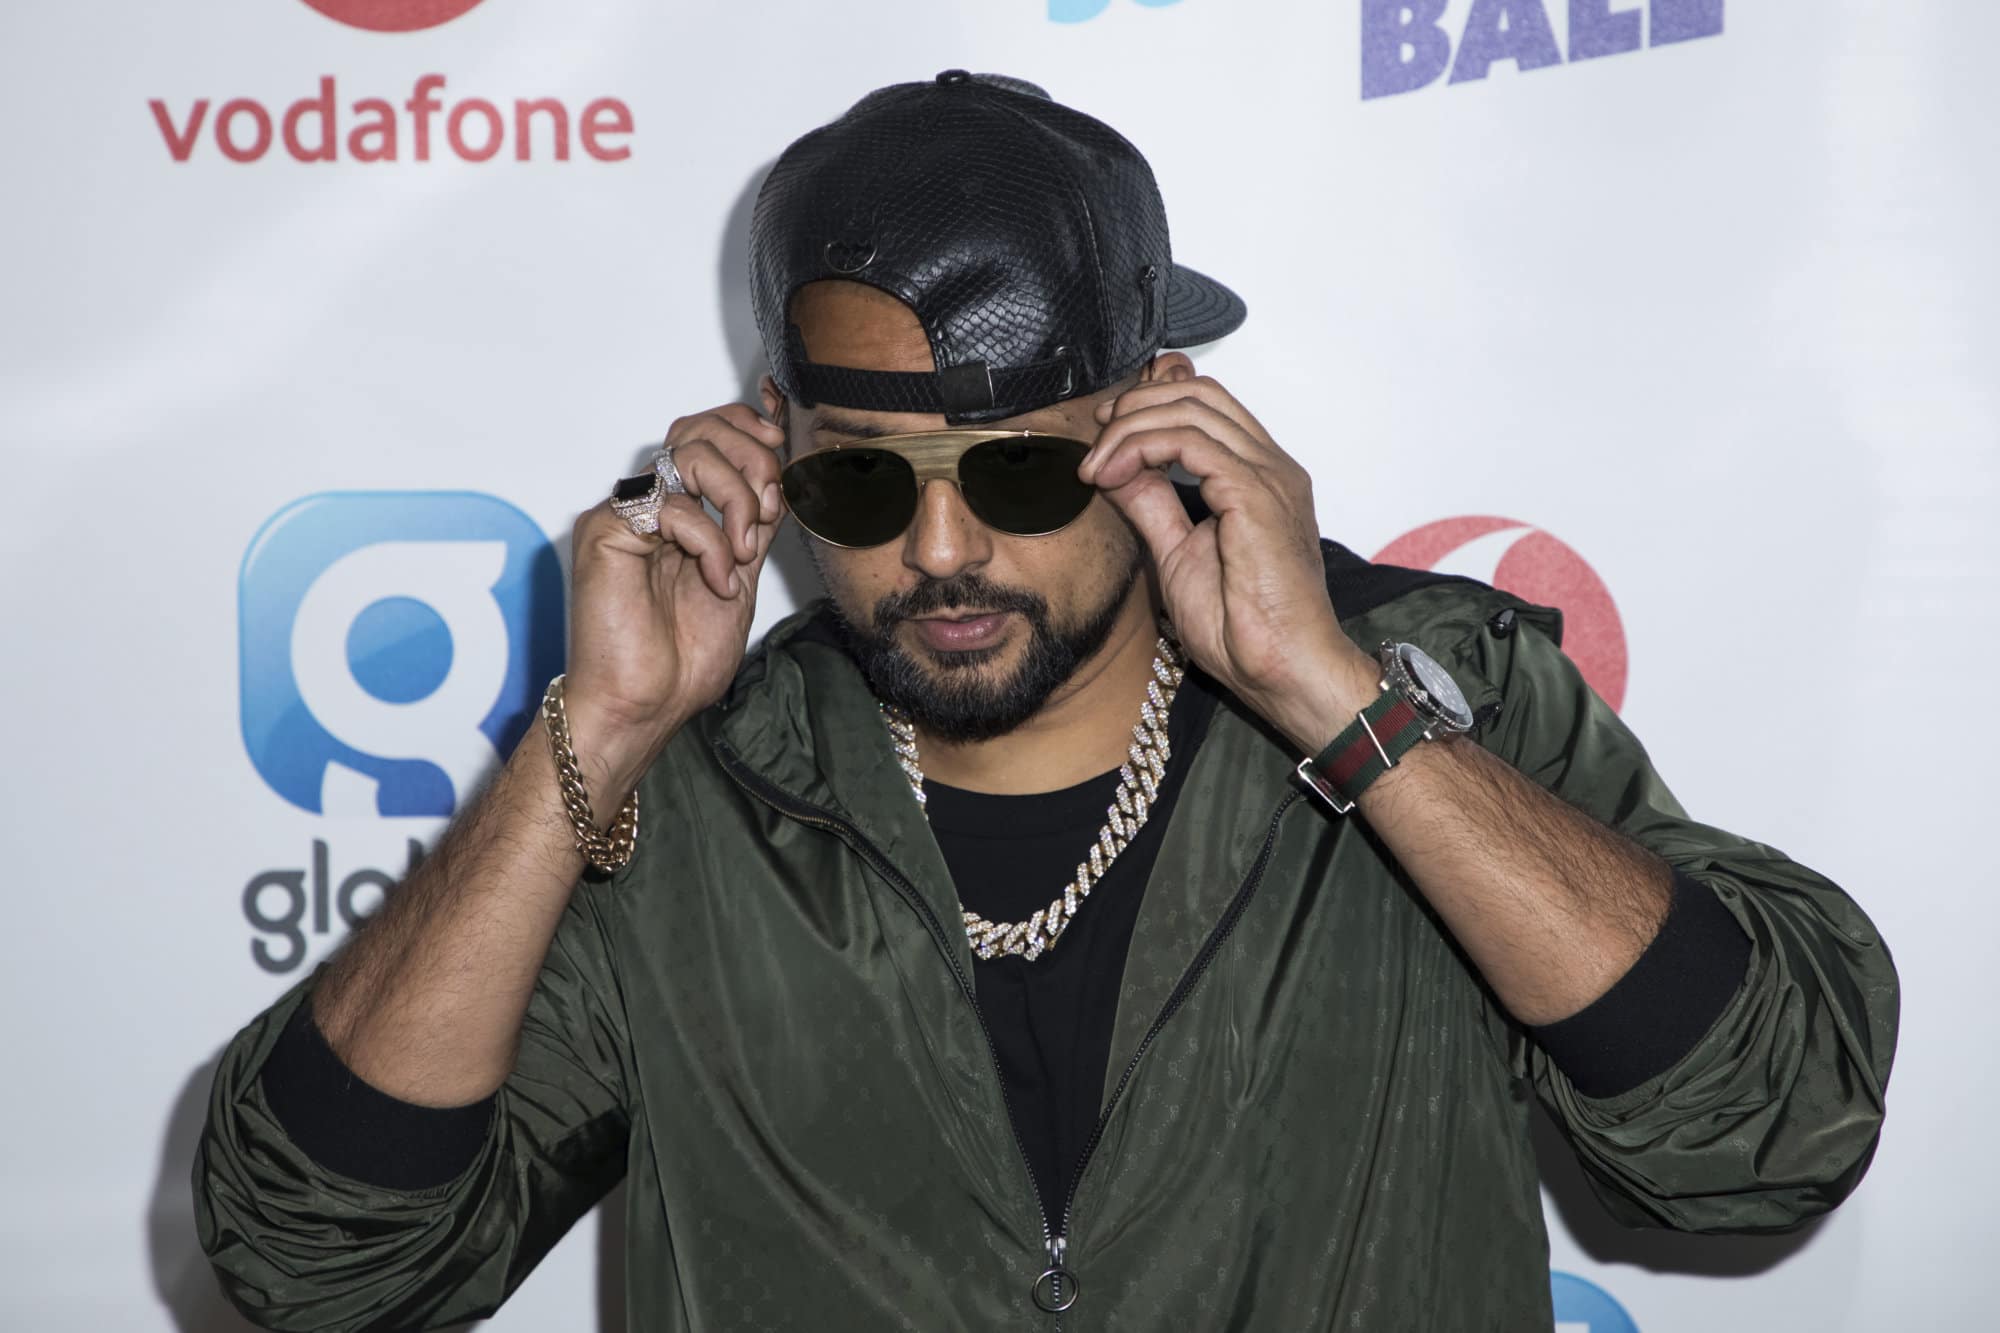 Sean Paul poses for photographers upon arrival at the Capital FM Summertime Ball, in London, Saturday June 9, 2018. (Photo by Vianney Le Caer/Invision/AP)